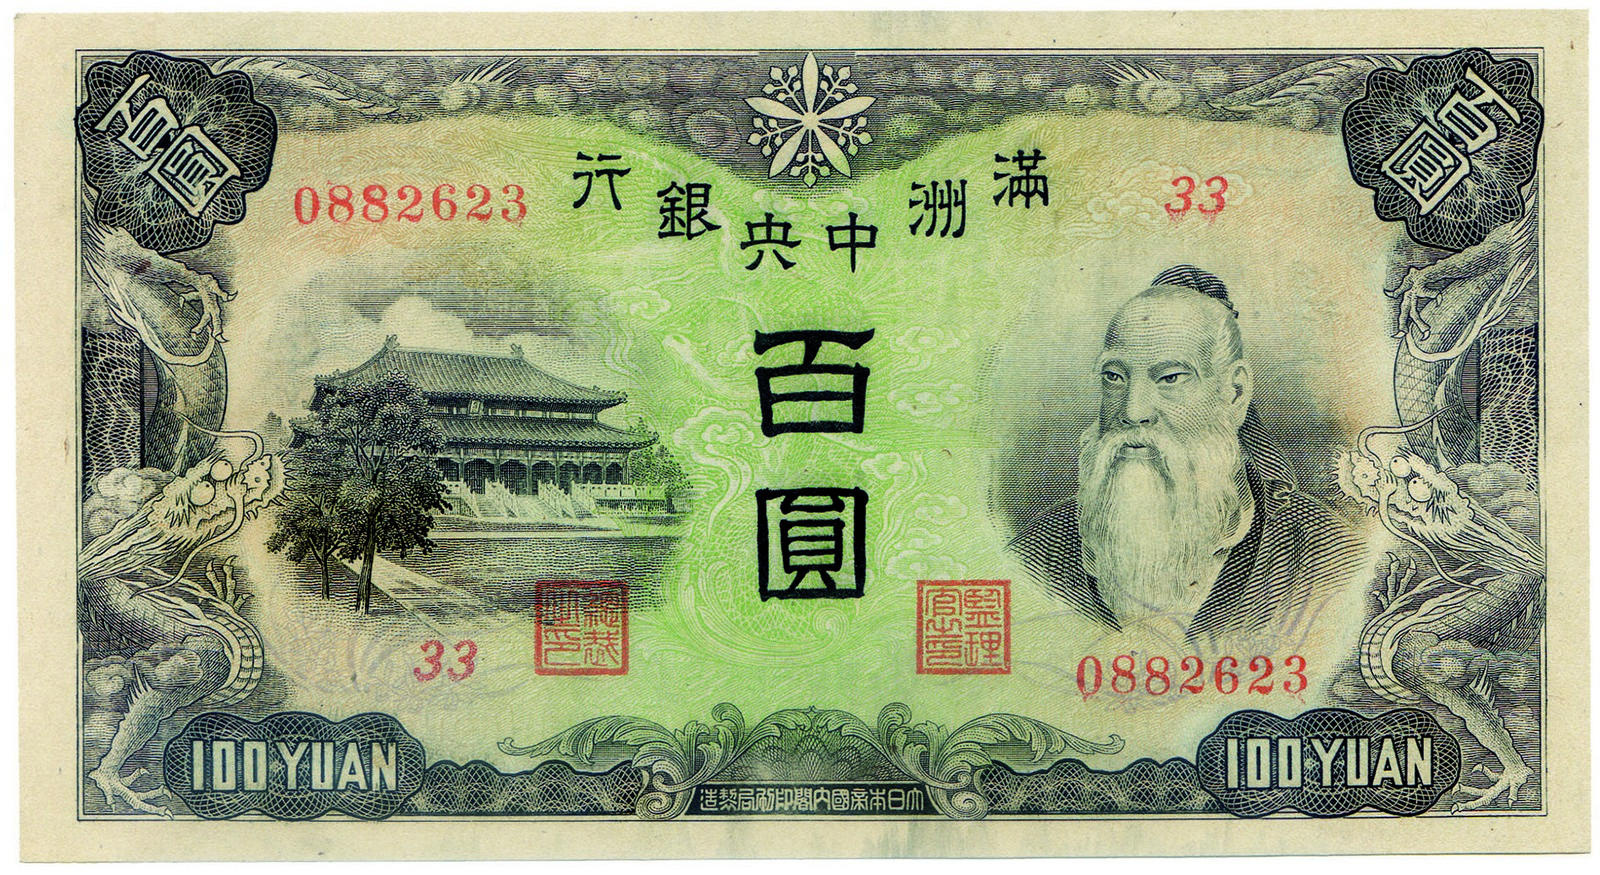 BANKNOTES, 紙鈔, CHINA - PUPPET BANKS, 中國 - 日偽傀儡銀行, Central Bank of Manchukuo 滿洲中央銀行: 100-Yuan, ND (